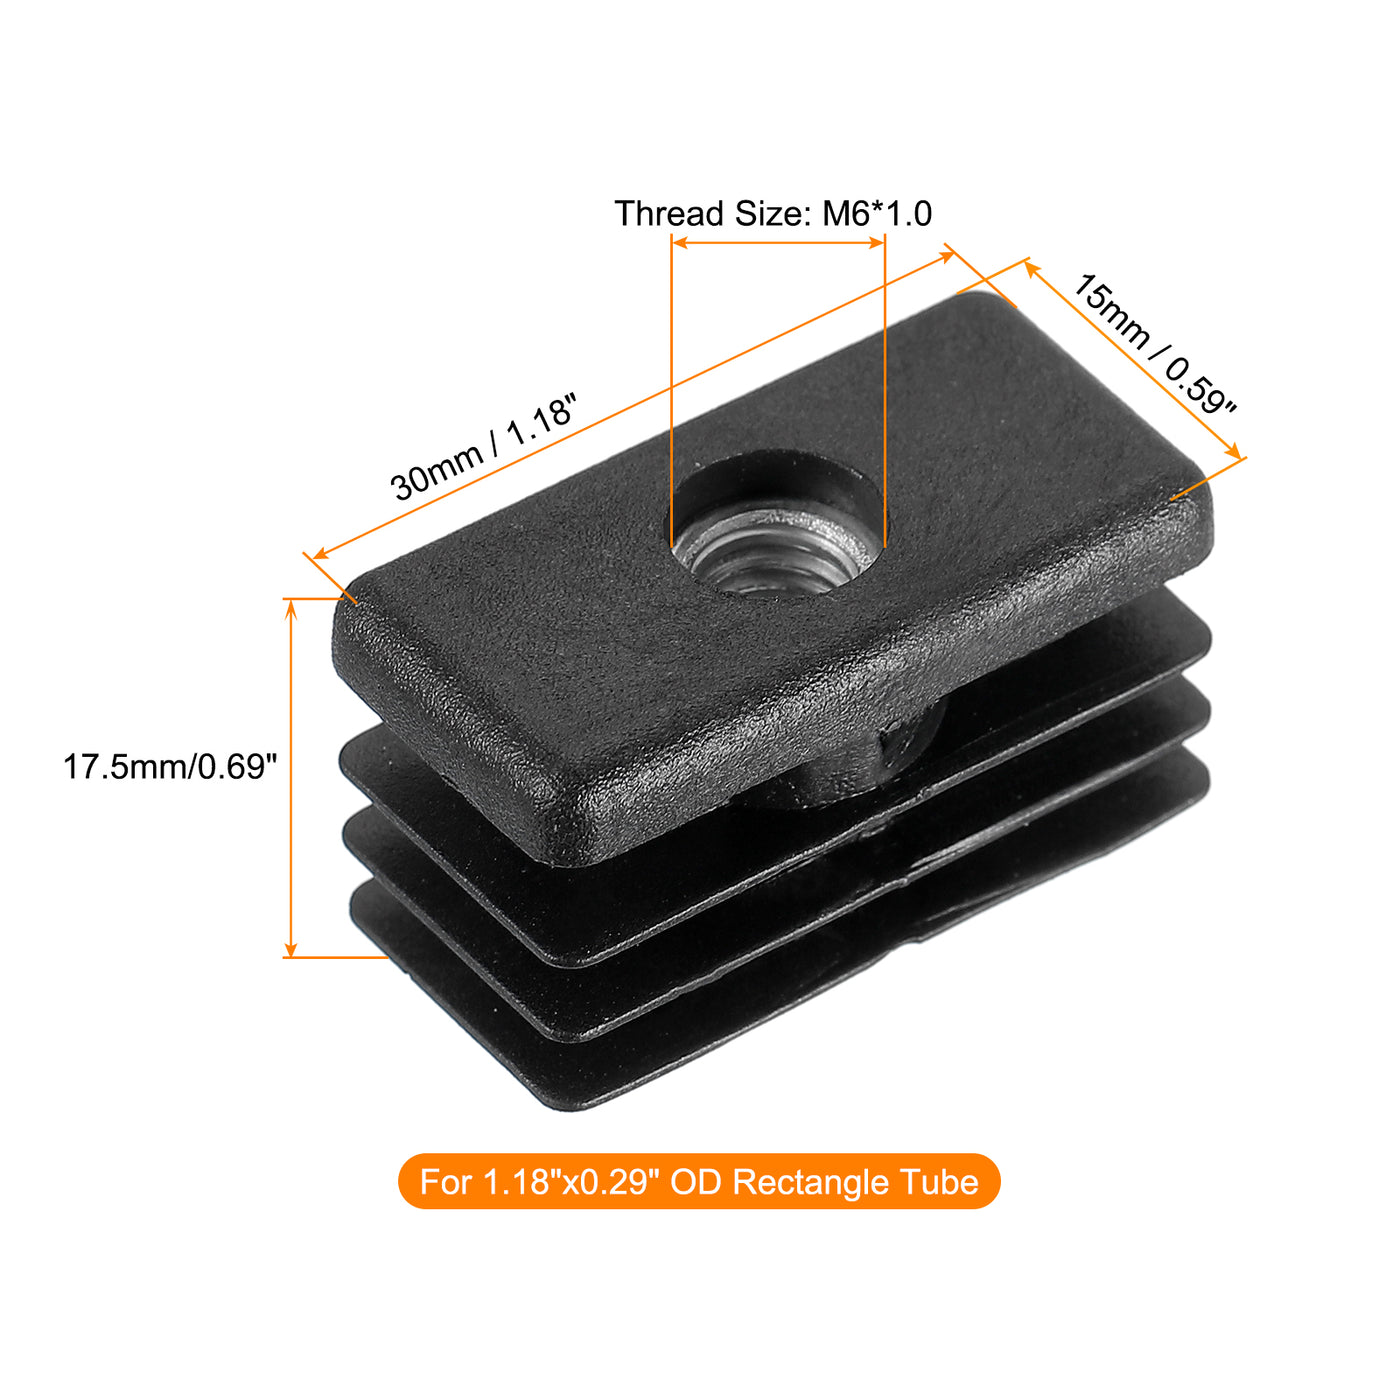 uxcell Uxcell 12Pcs 1.18"x0.59" Caster Insert with Thread, Rectangle M6 Thread for Furniture